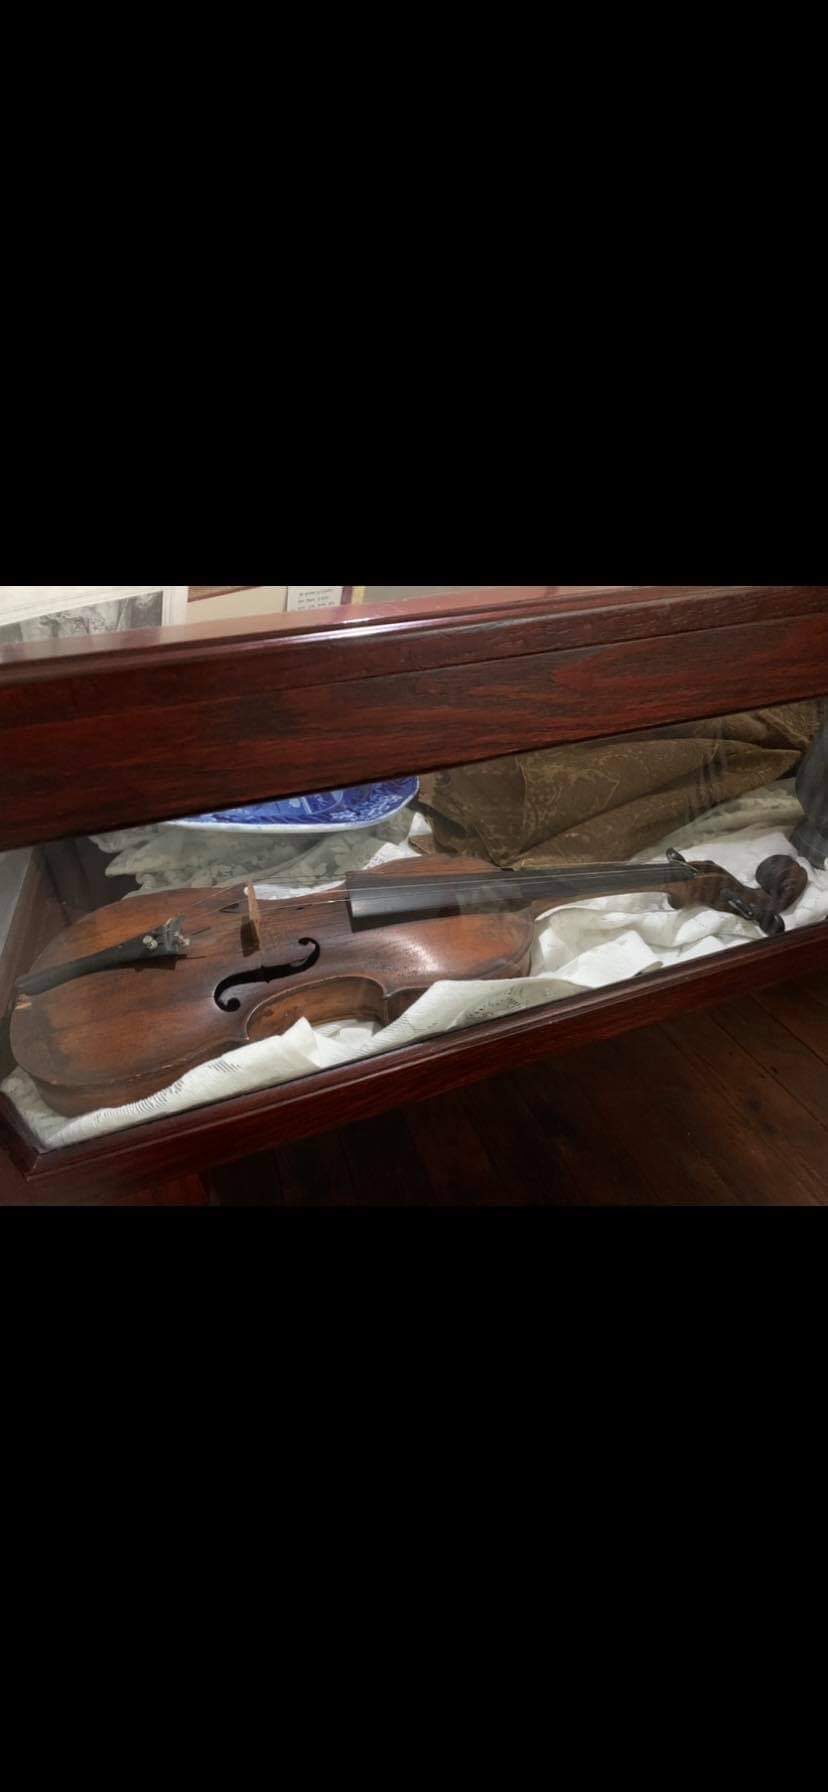 Violin that was played during General Lafayette's visit in 1825